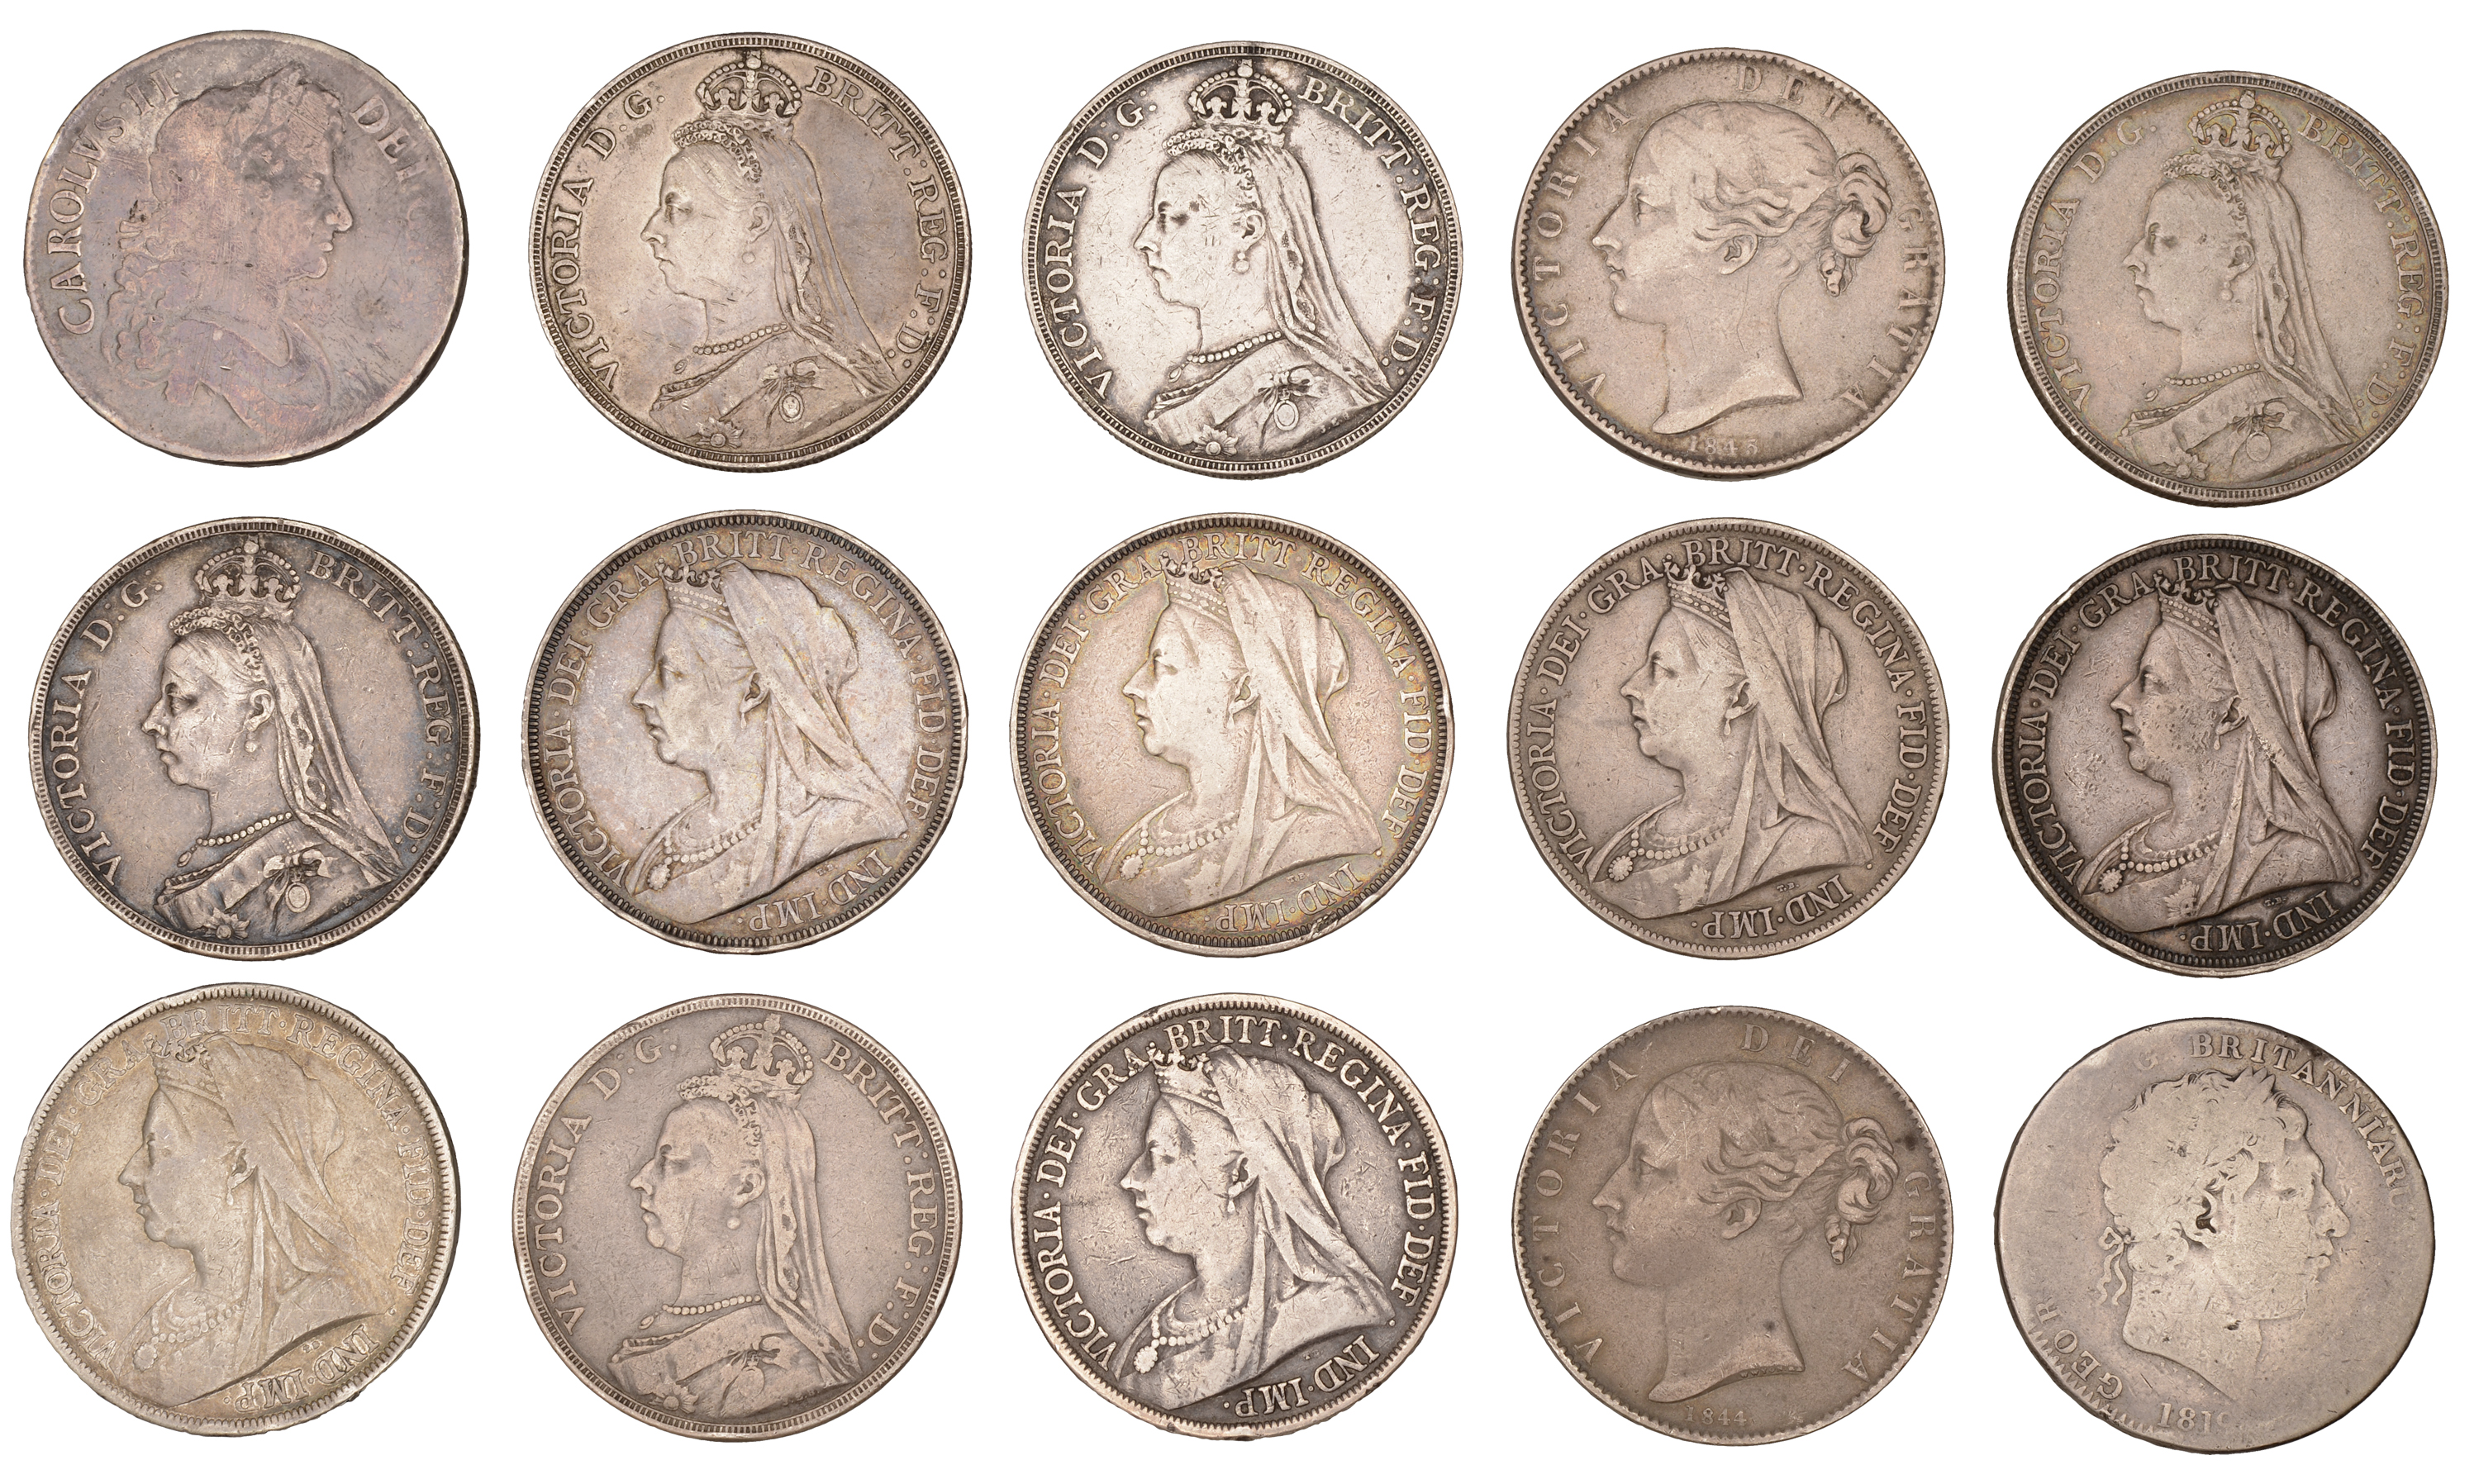 Charles II to Victoria, Crowns (15), 1676, 1819, 1844, 1845, 1889 (2), 1891, 1890 (2), 1893...